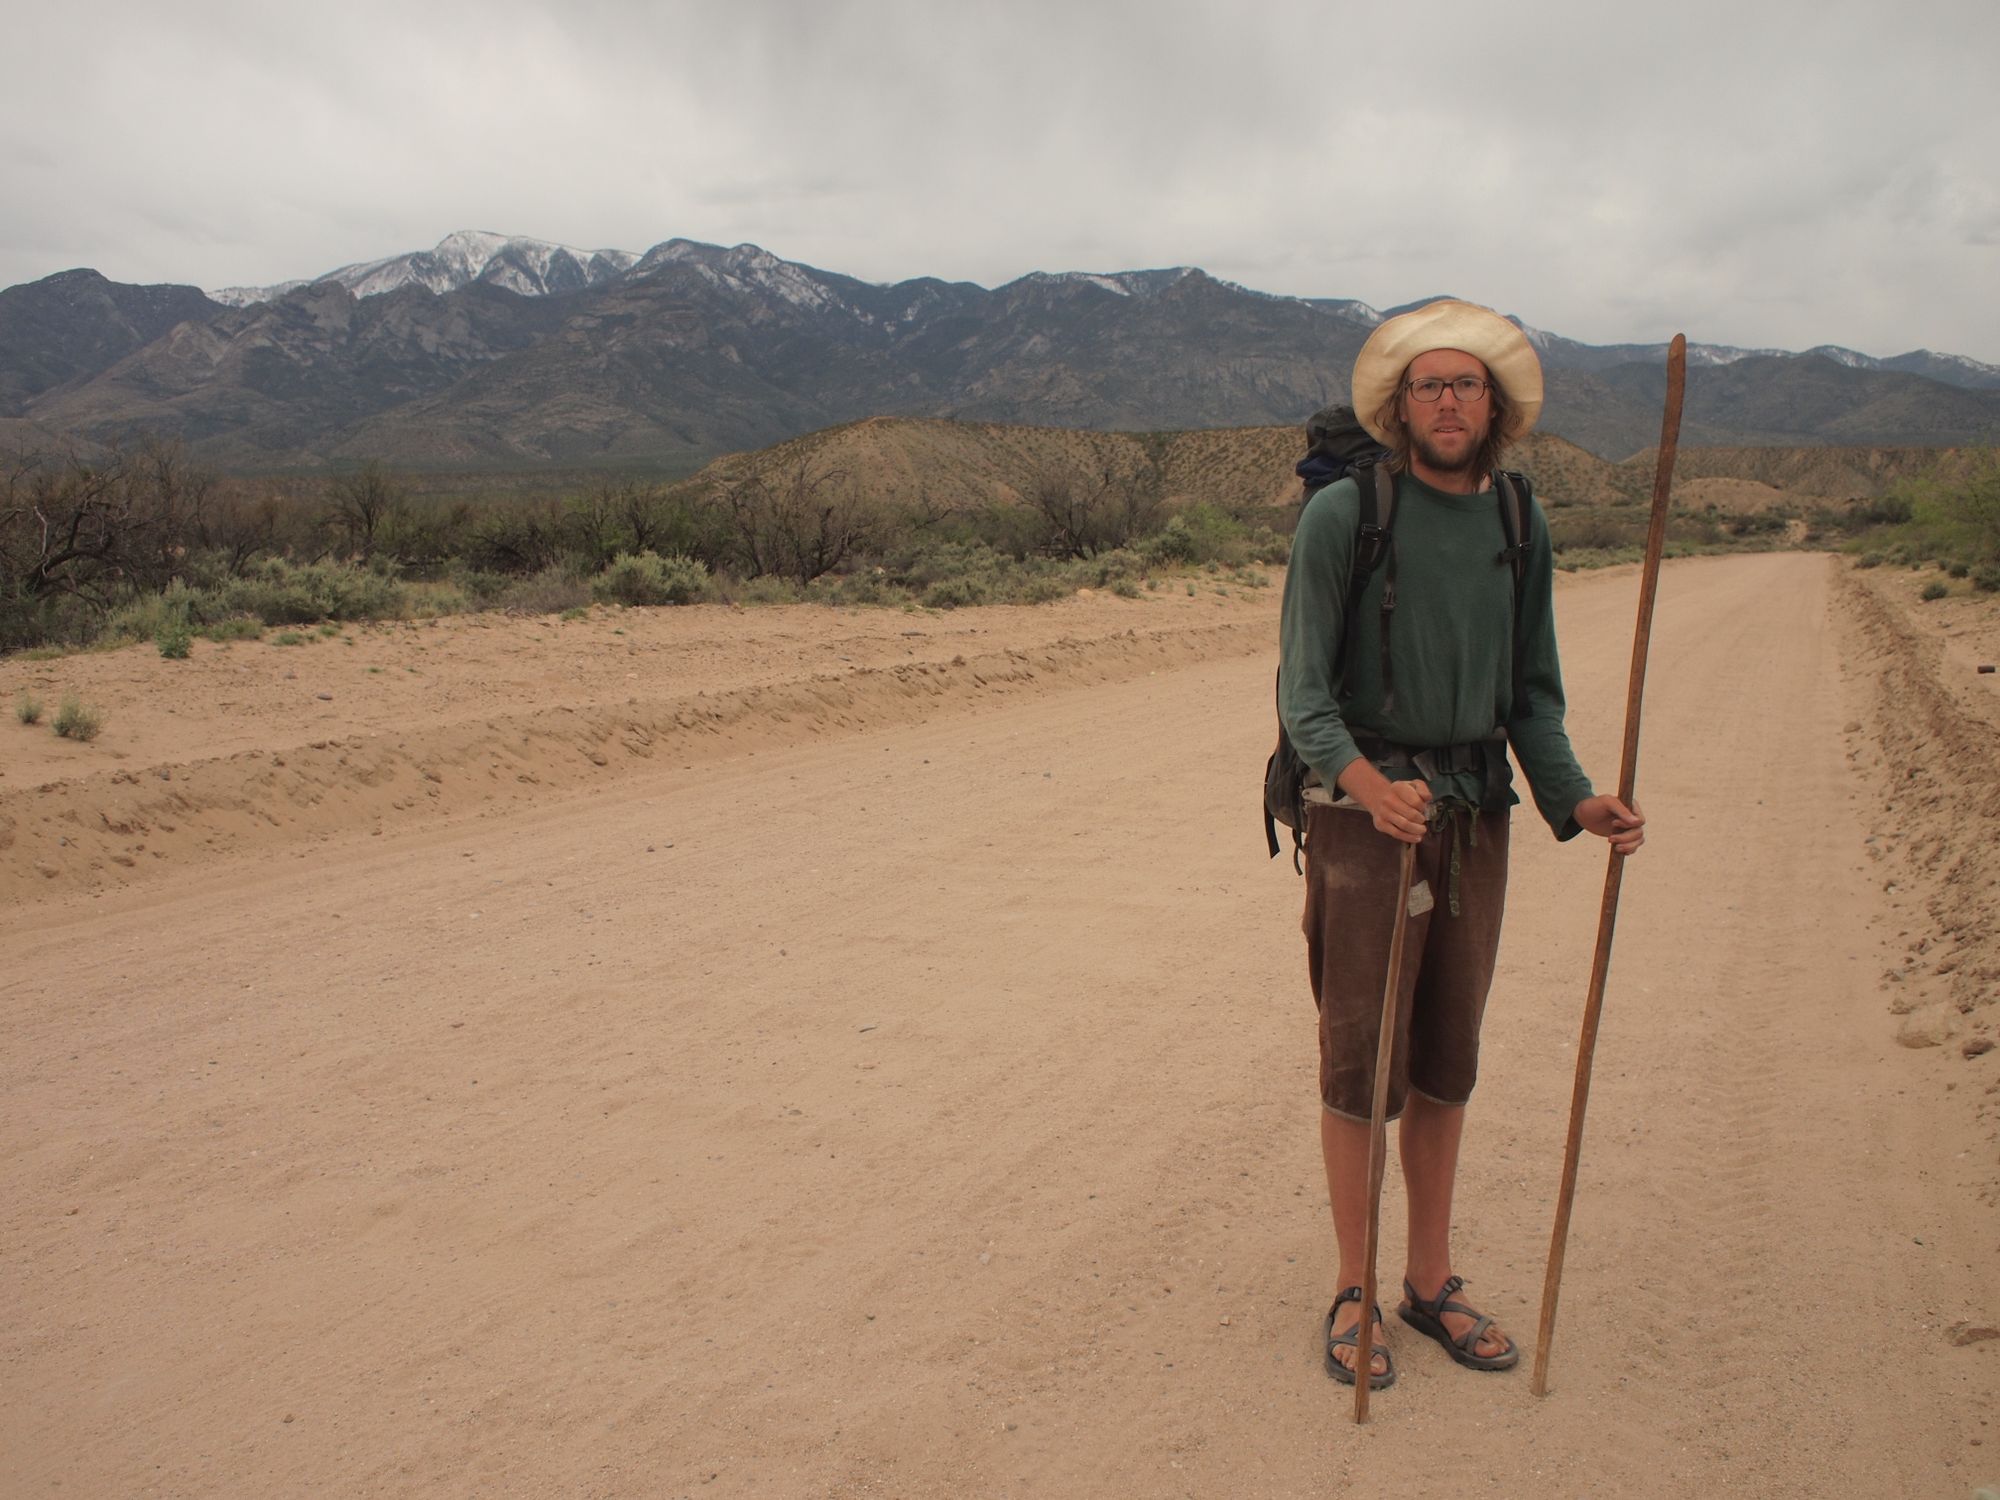 A man stands in the middle of a dirt road in the desert with snowy mountains behind. 